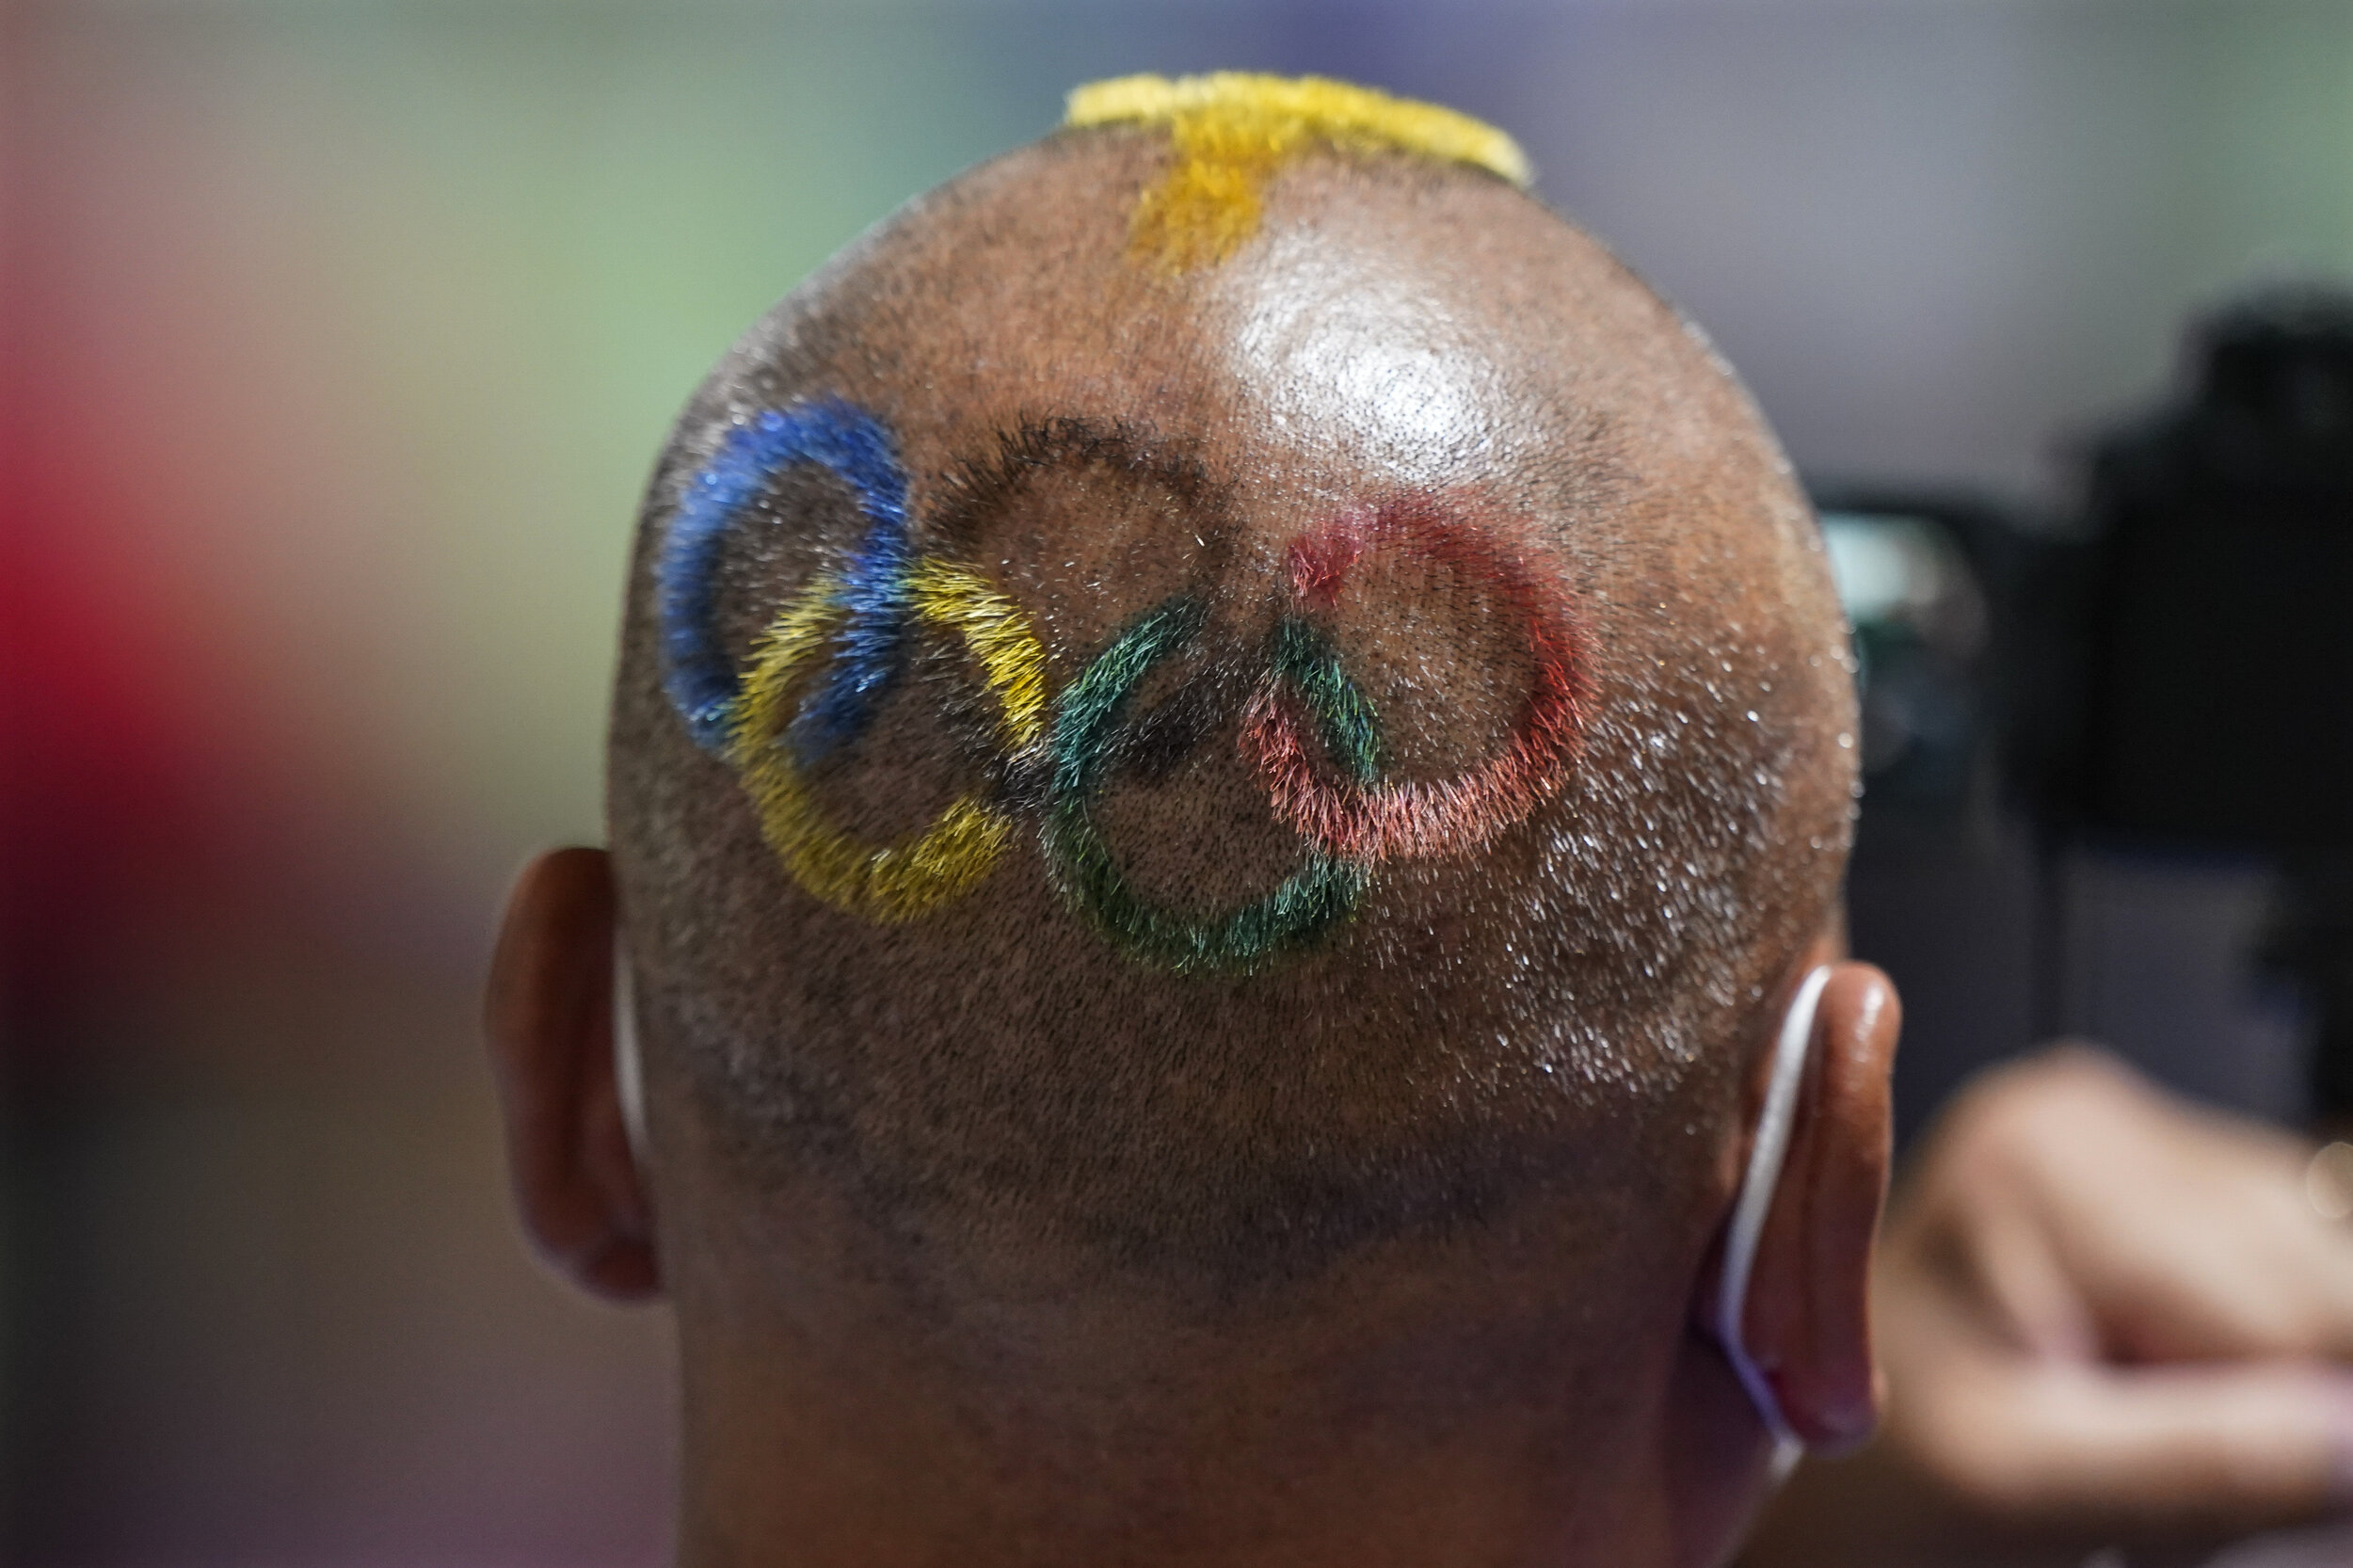  Mongolian coach Undralbat Lkhagva has the Olympic rings cut and dyed into his hair as he watches the women's 10-meter air pistol at the Asaka Shooting Range in the 2020 Summer Olympics, Sunday, July 25, 2021, in Tokyo, Japan. (AP Photo/Alex Brandon)